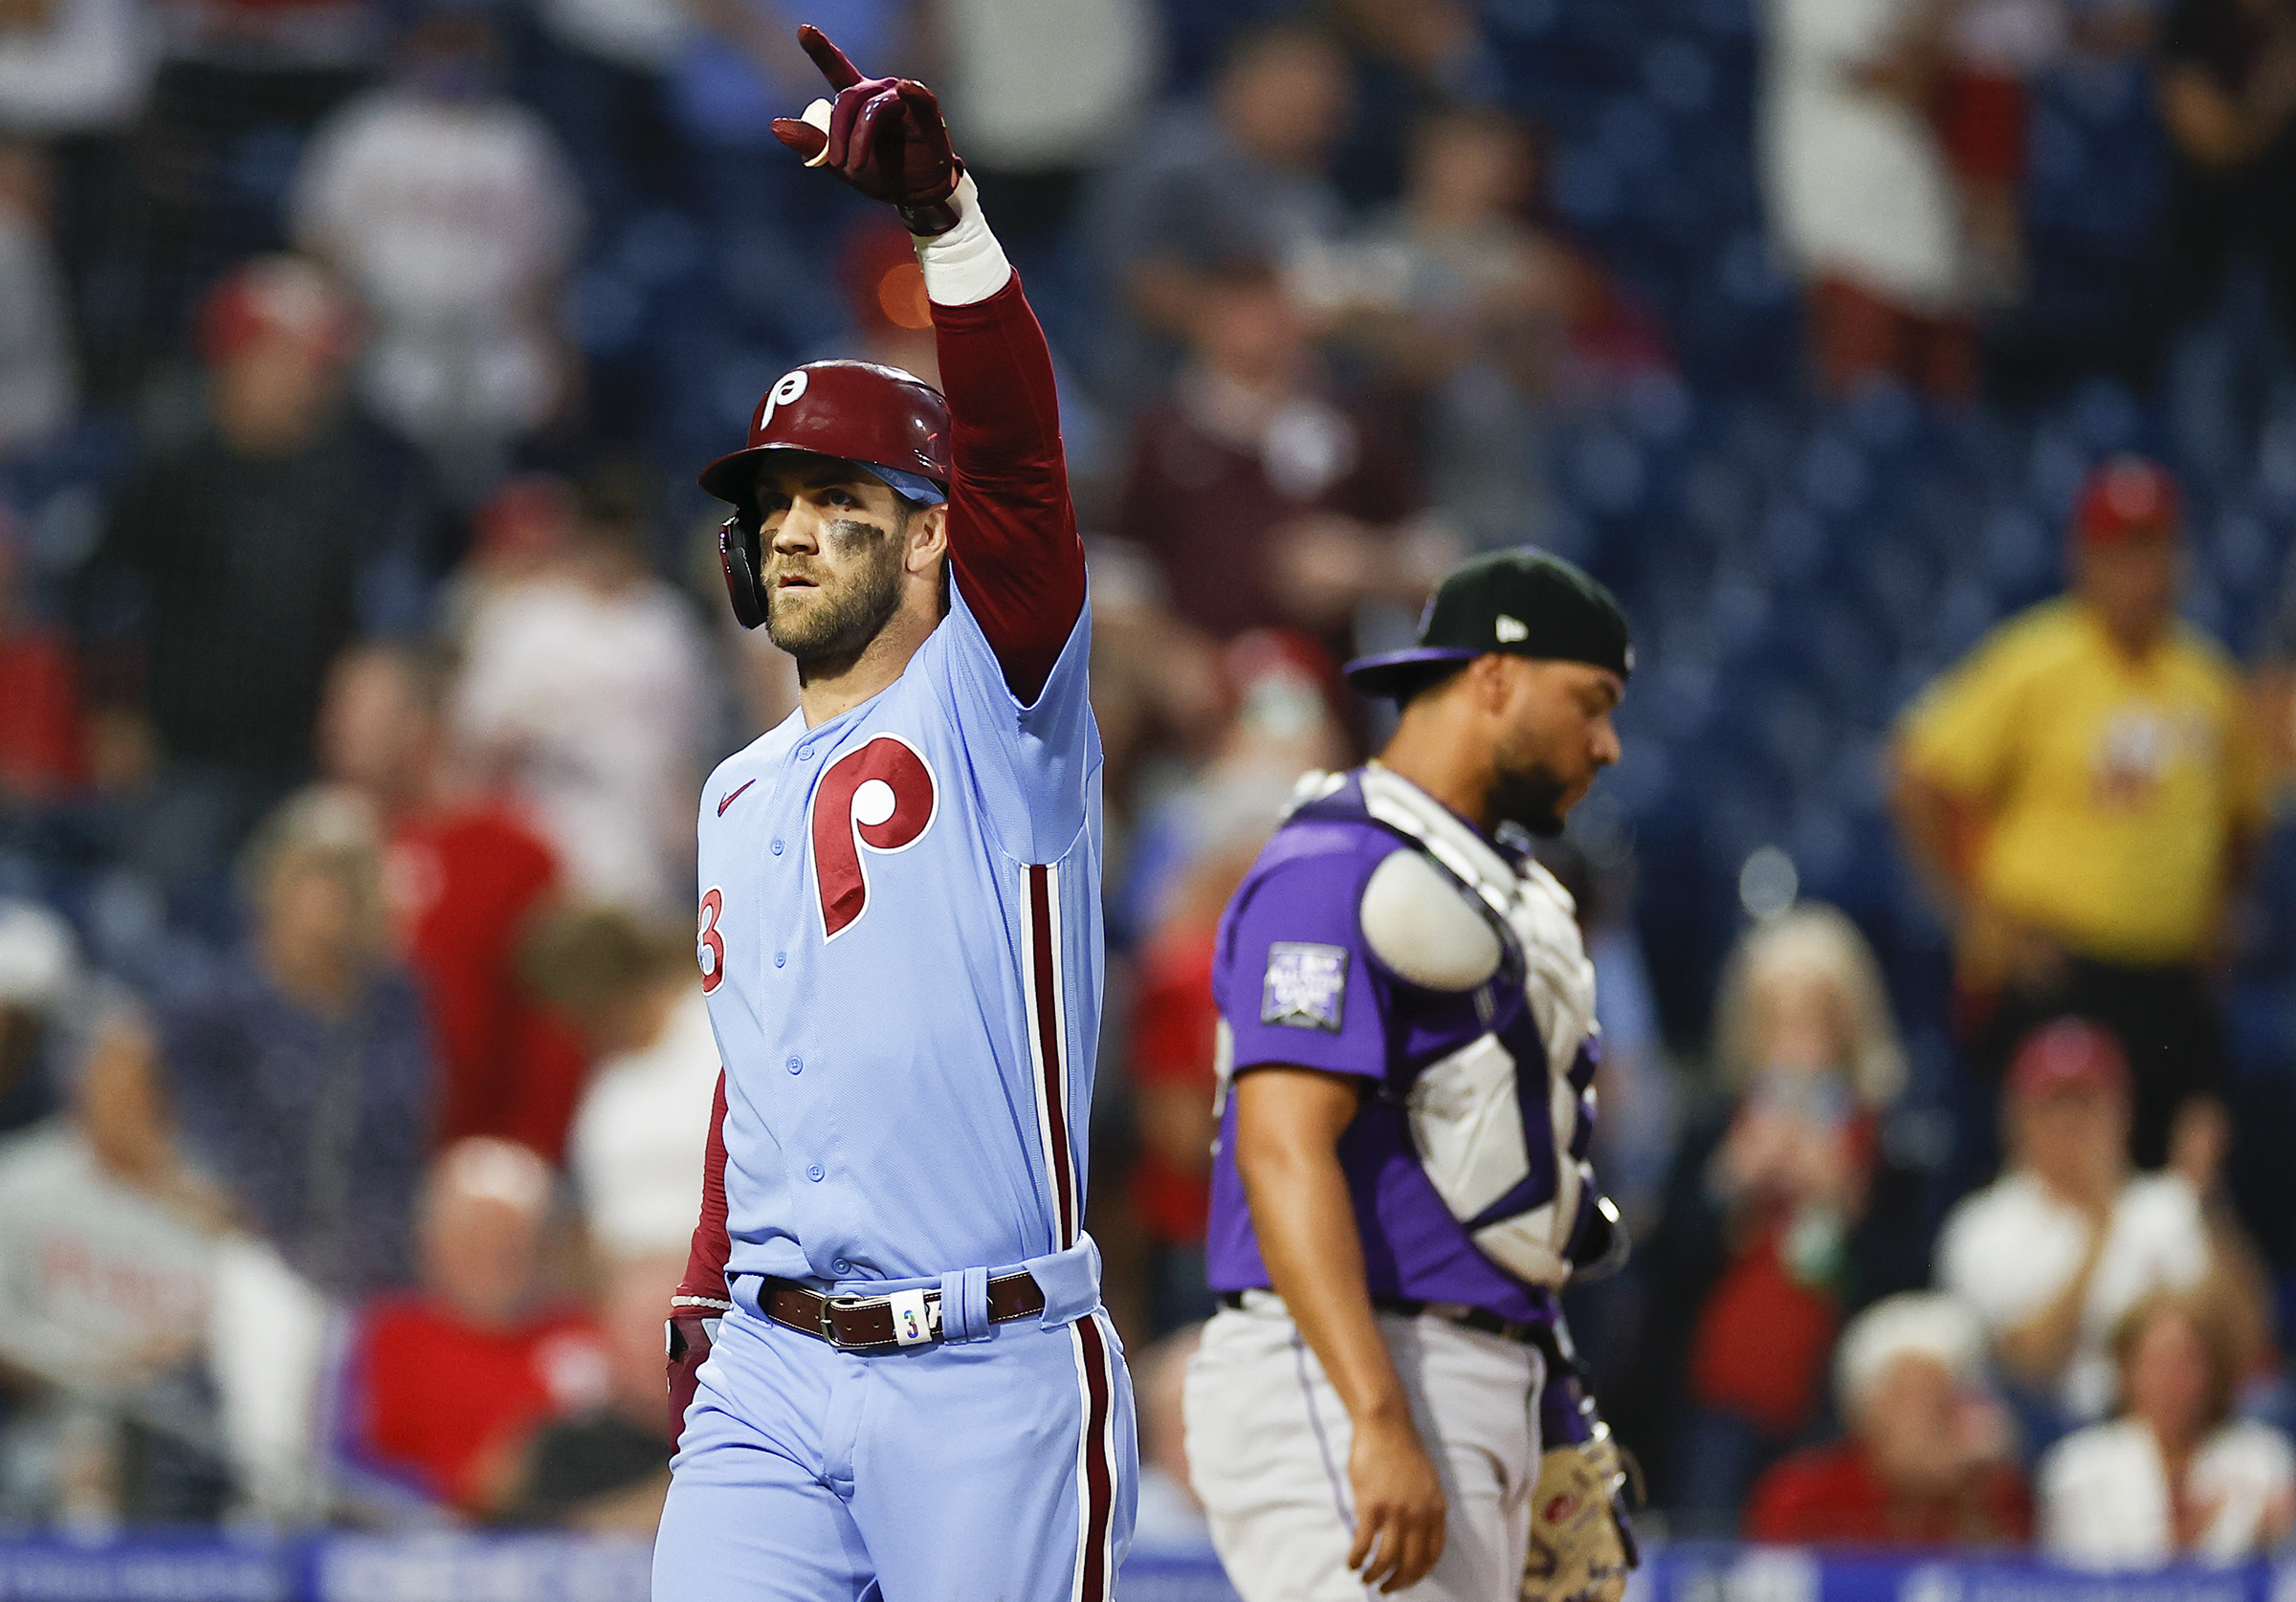 Mike Schmidt: Harper is clear MVP, he's Pete Rose with power